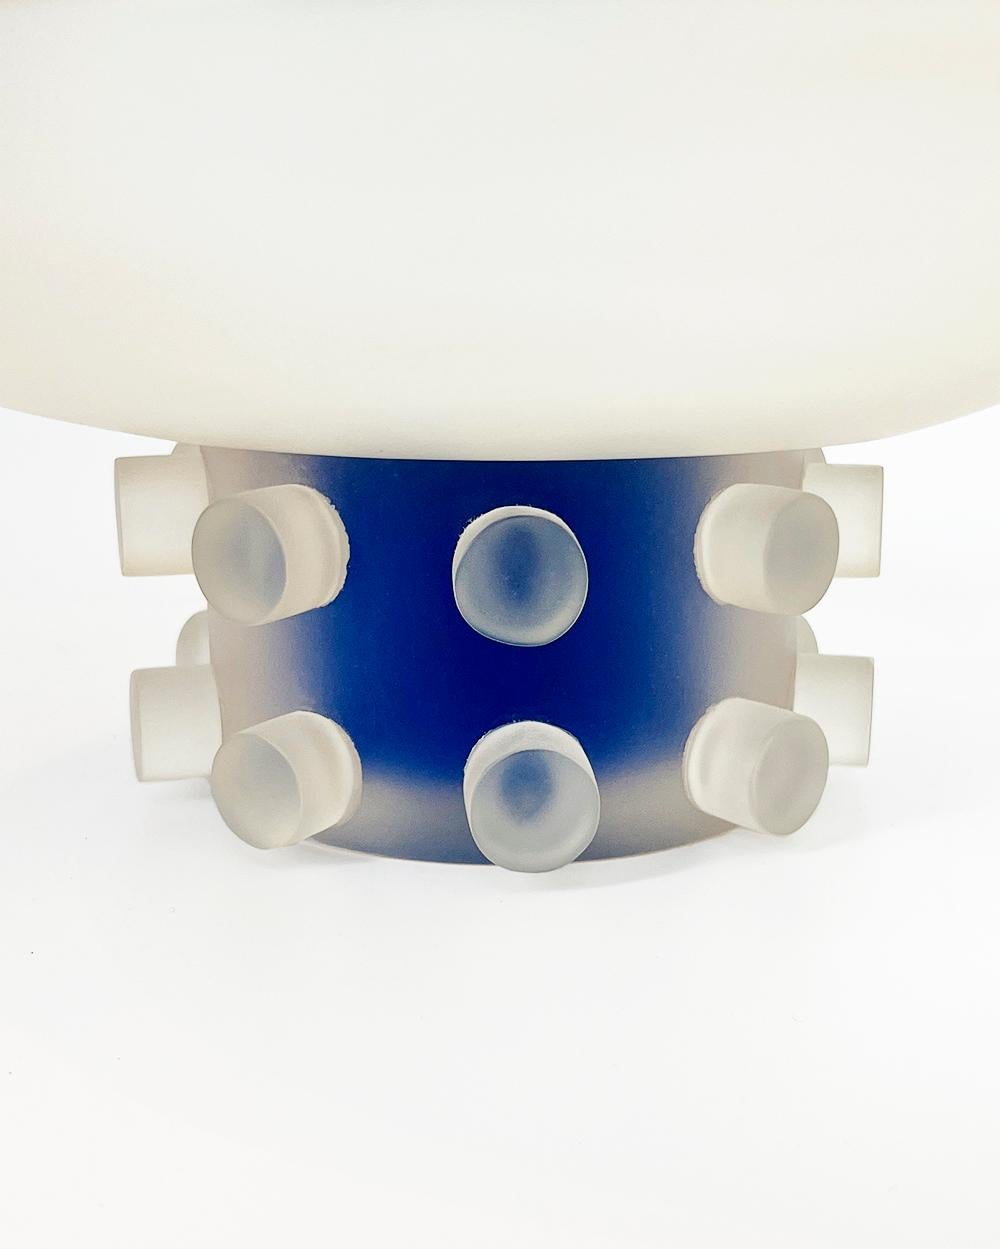 A unique bowl for your coffee table
This Xilitla Clear and Blue Resin Pedestal Bowl adds a unique touch to your home. Crafted with clear resin and a striking blue hue, it creates a modern, industrial look with a hint of Mexican artisanal design. The